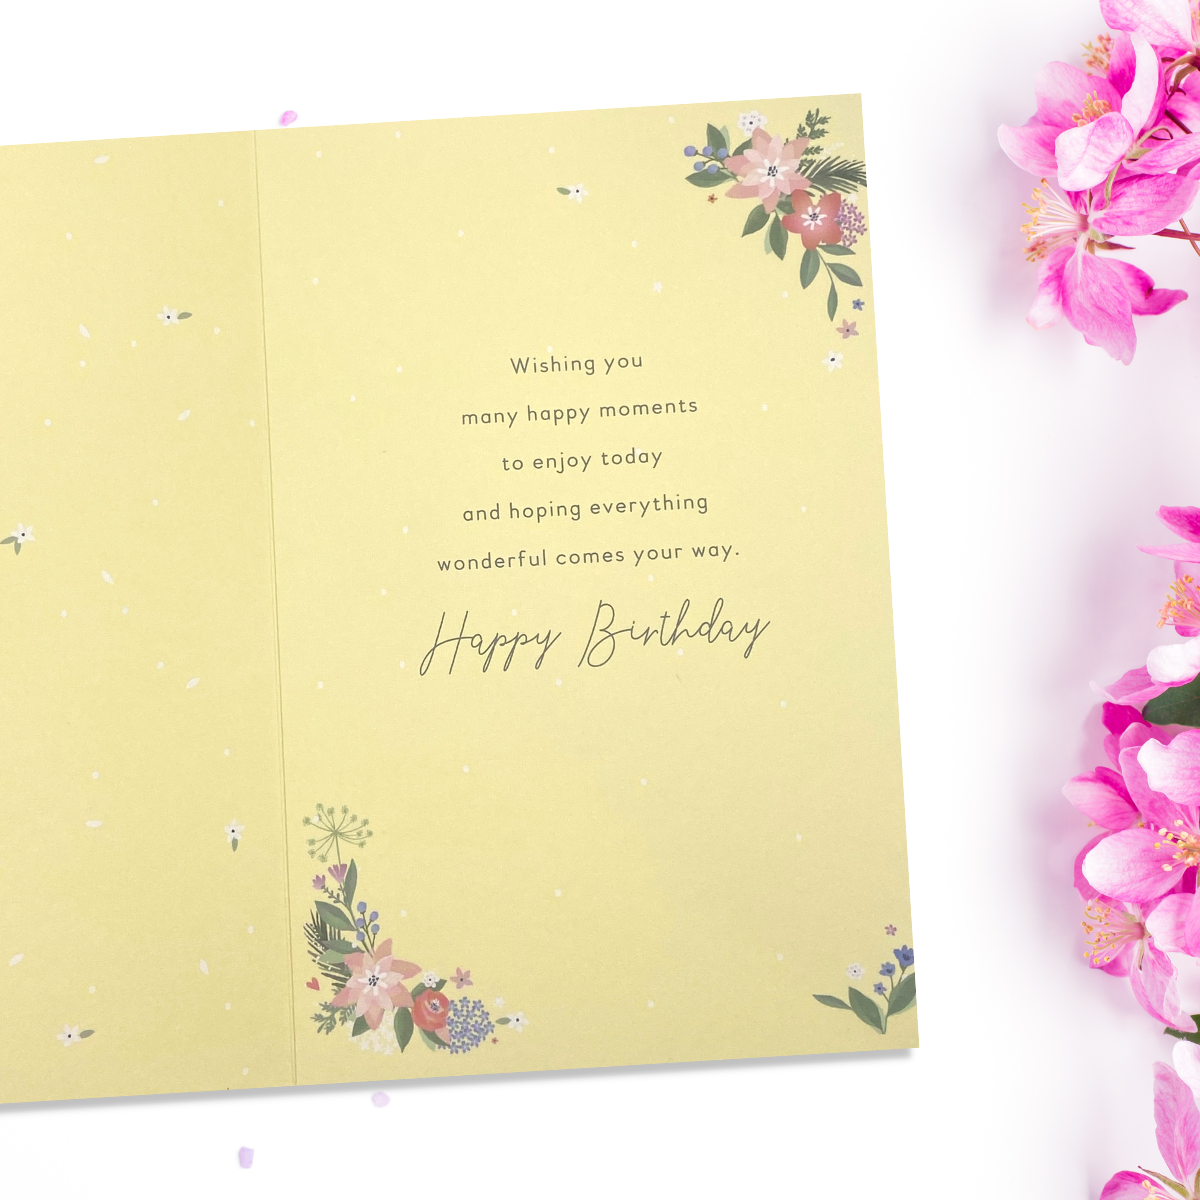 Inside image with full colour print and verse with floral border